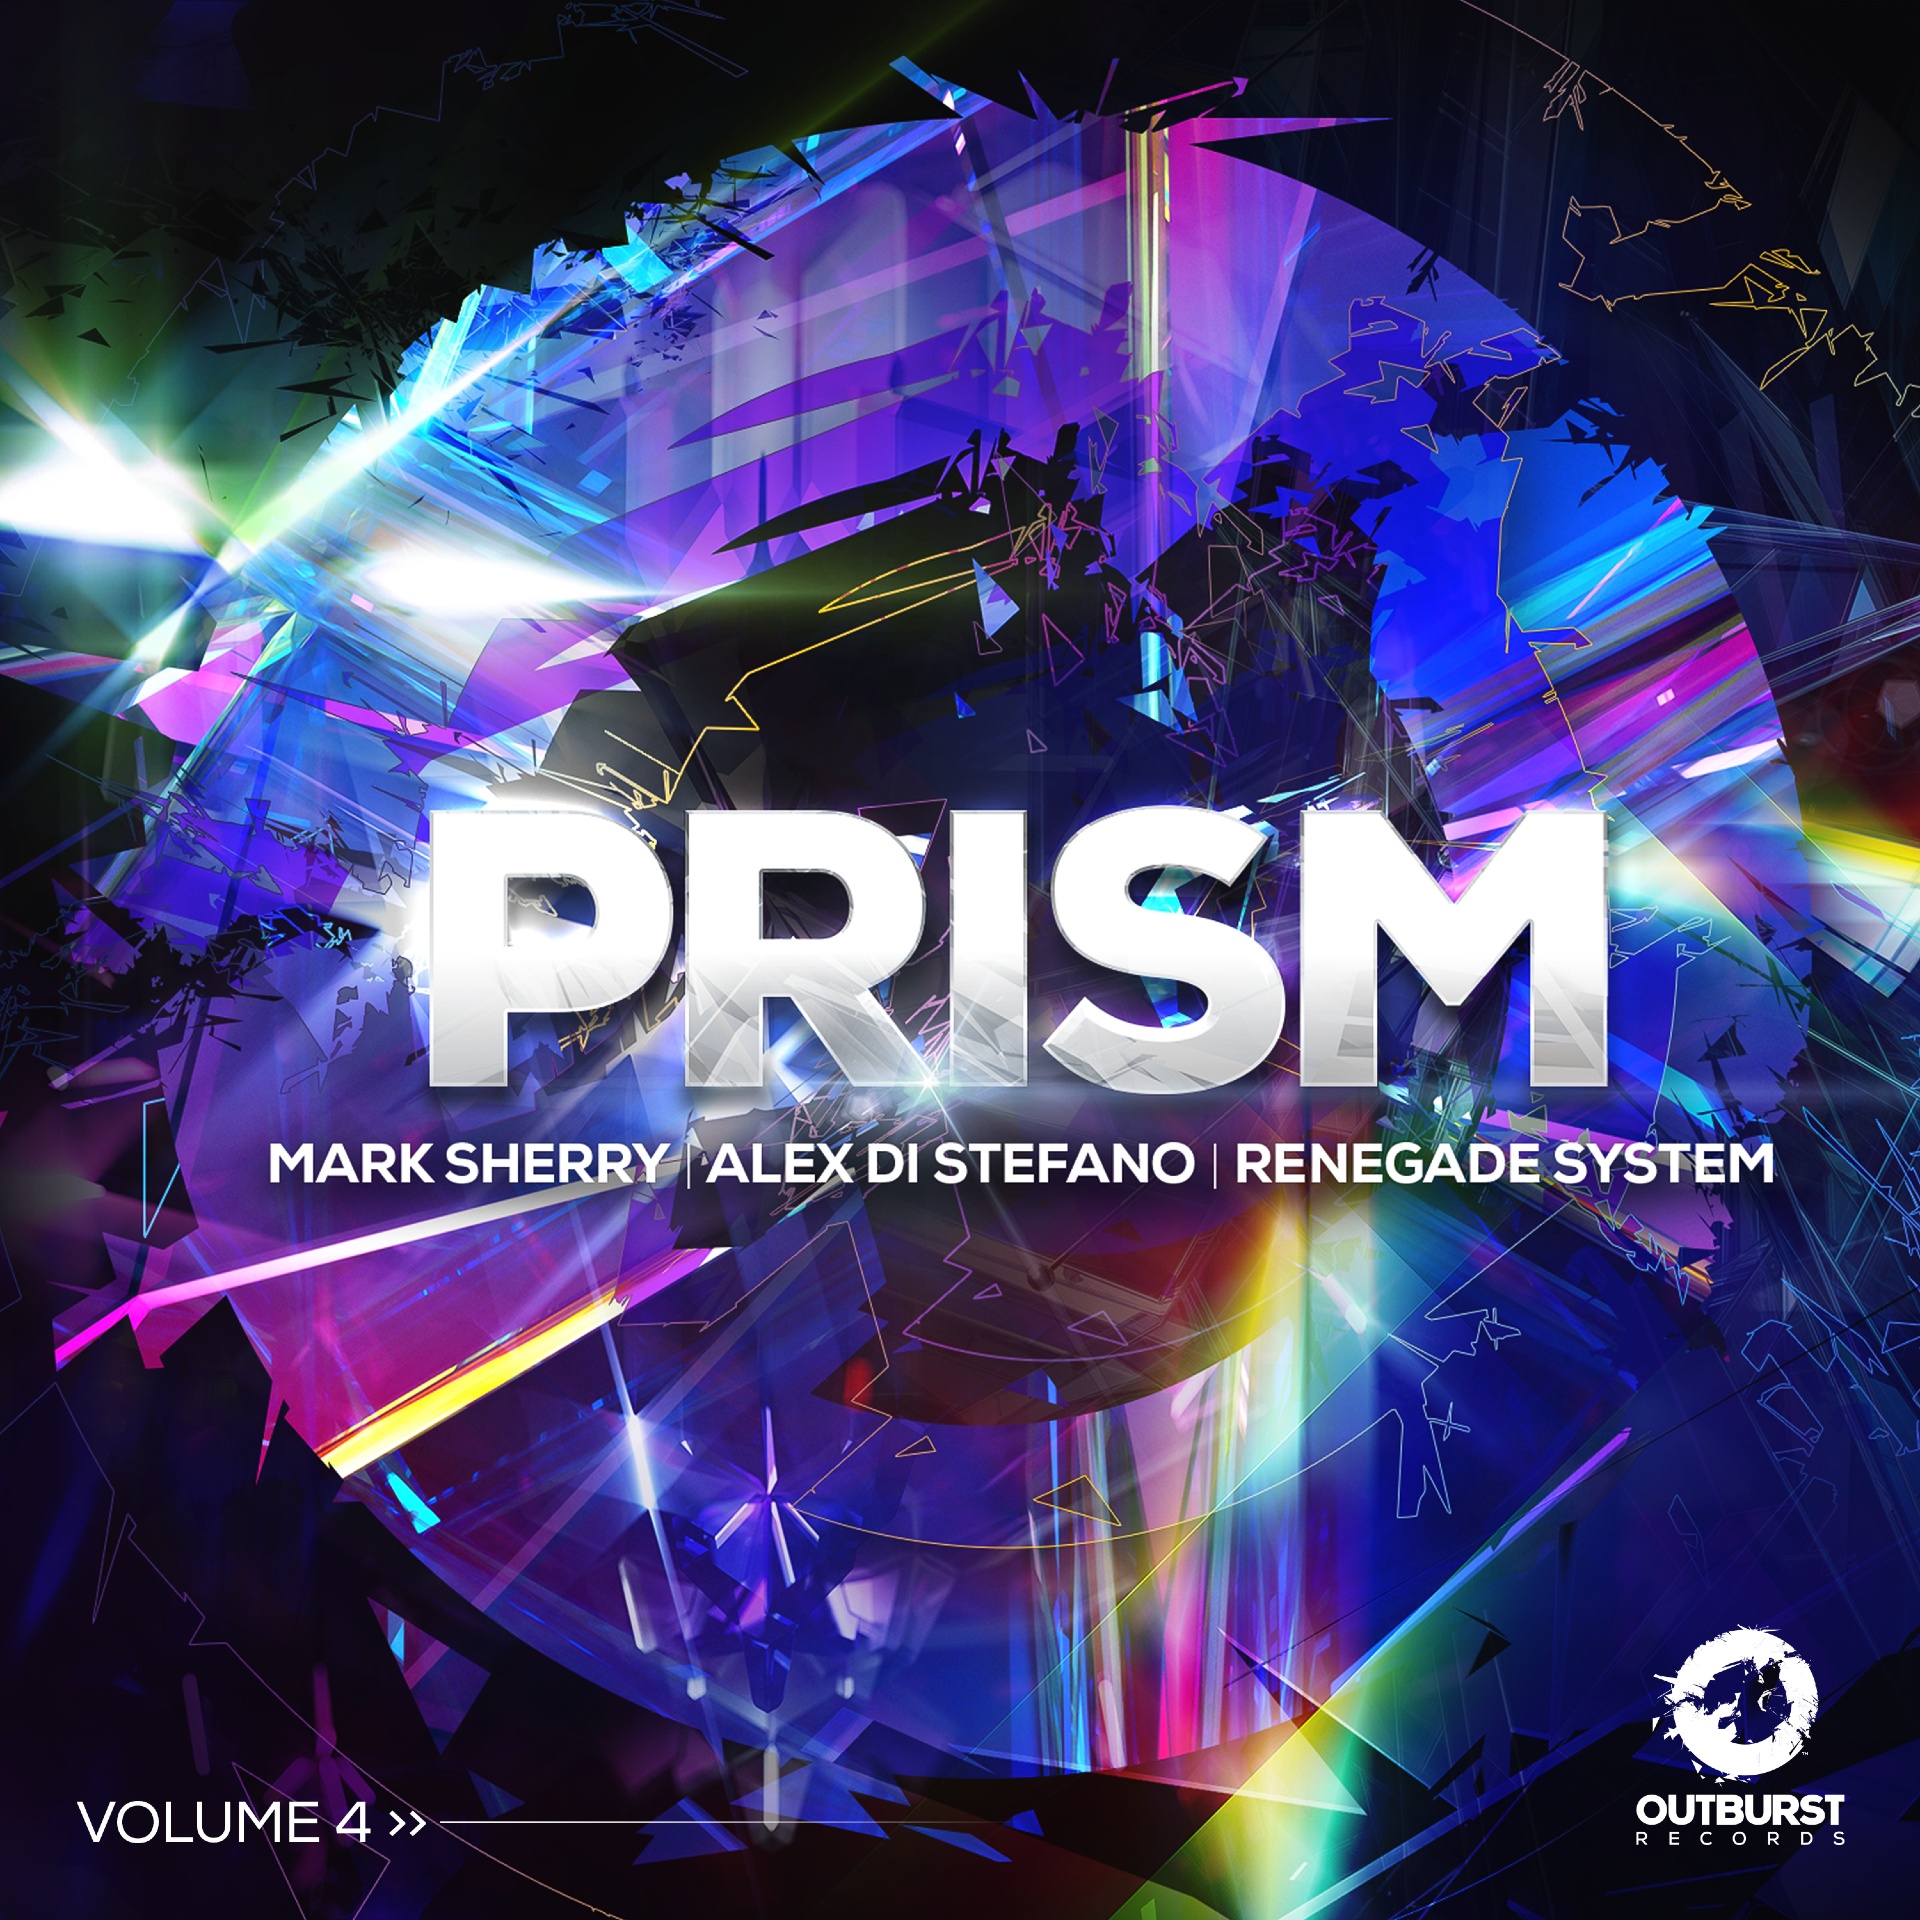 Various Artists presents Prism volume 4 mixed by Mark Sherry, Alex Di Stefano and Renegade System on Outburst Records